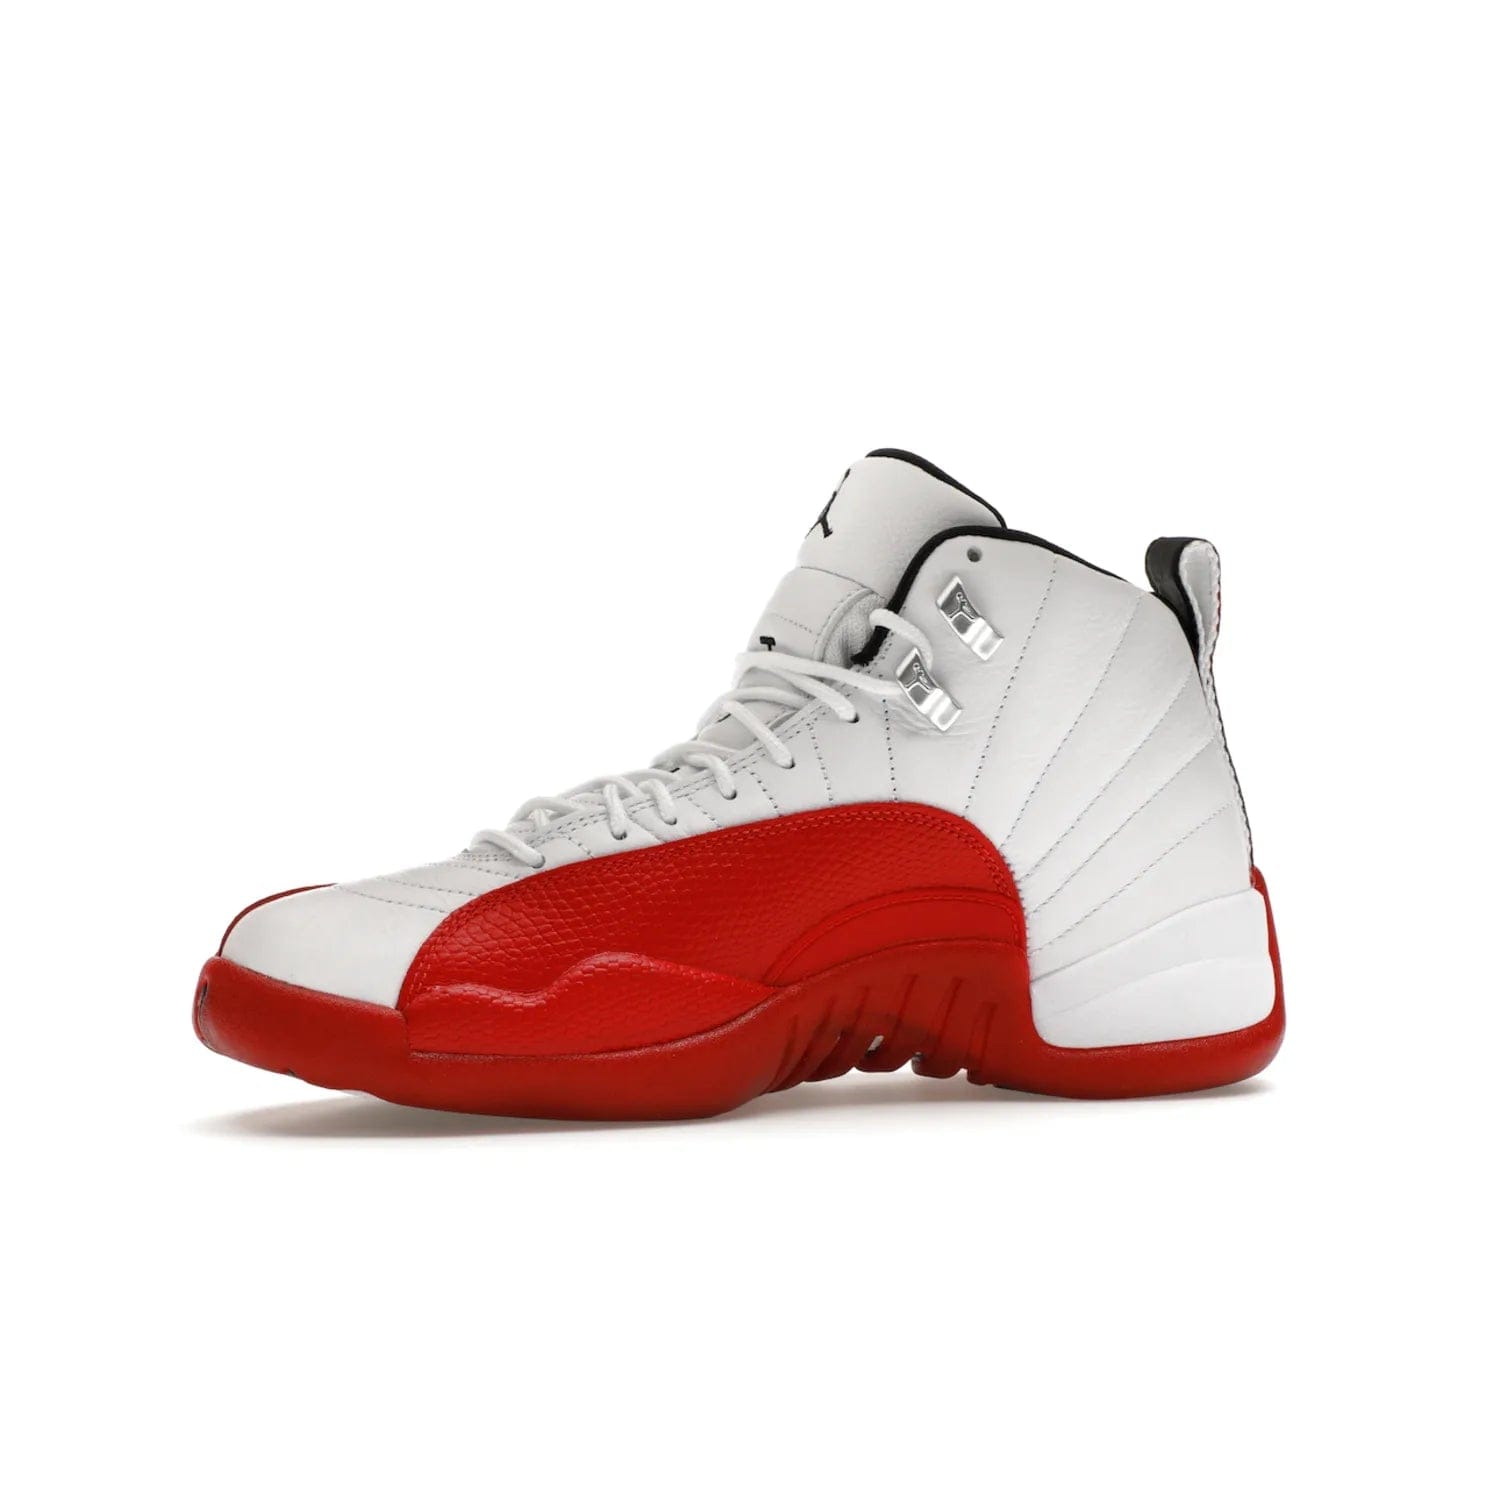 Jordan 12 Retro Cherry (2023) - Image 17 - Only at www.BallersClubKickz.com - Live your sneaker legend with the Jordan 12 Retro Cherry. Iconic pebbled leather mudguards, quilted uppers, and varsity red accents make this 1997 classic a must-have for 2023. Shine on with silver hardware and matching midsoles, and bring it all together for limited-edition style on October 28th. Step into Jordan legacy with the Retro Cherry.